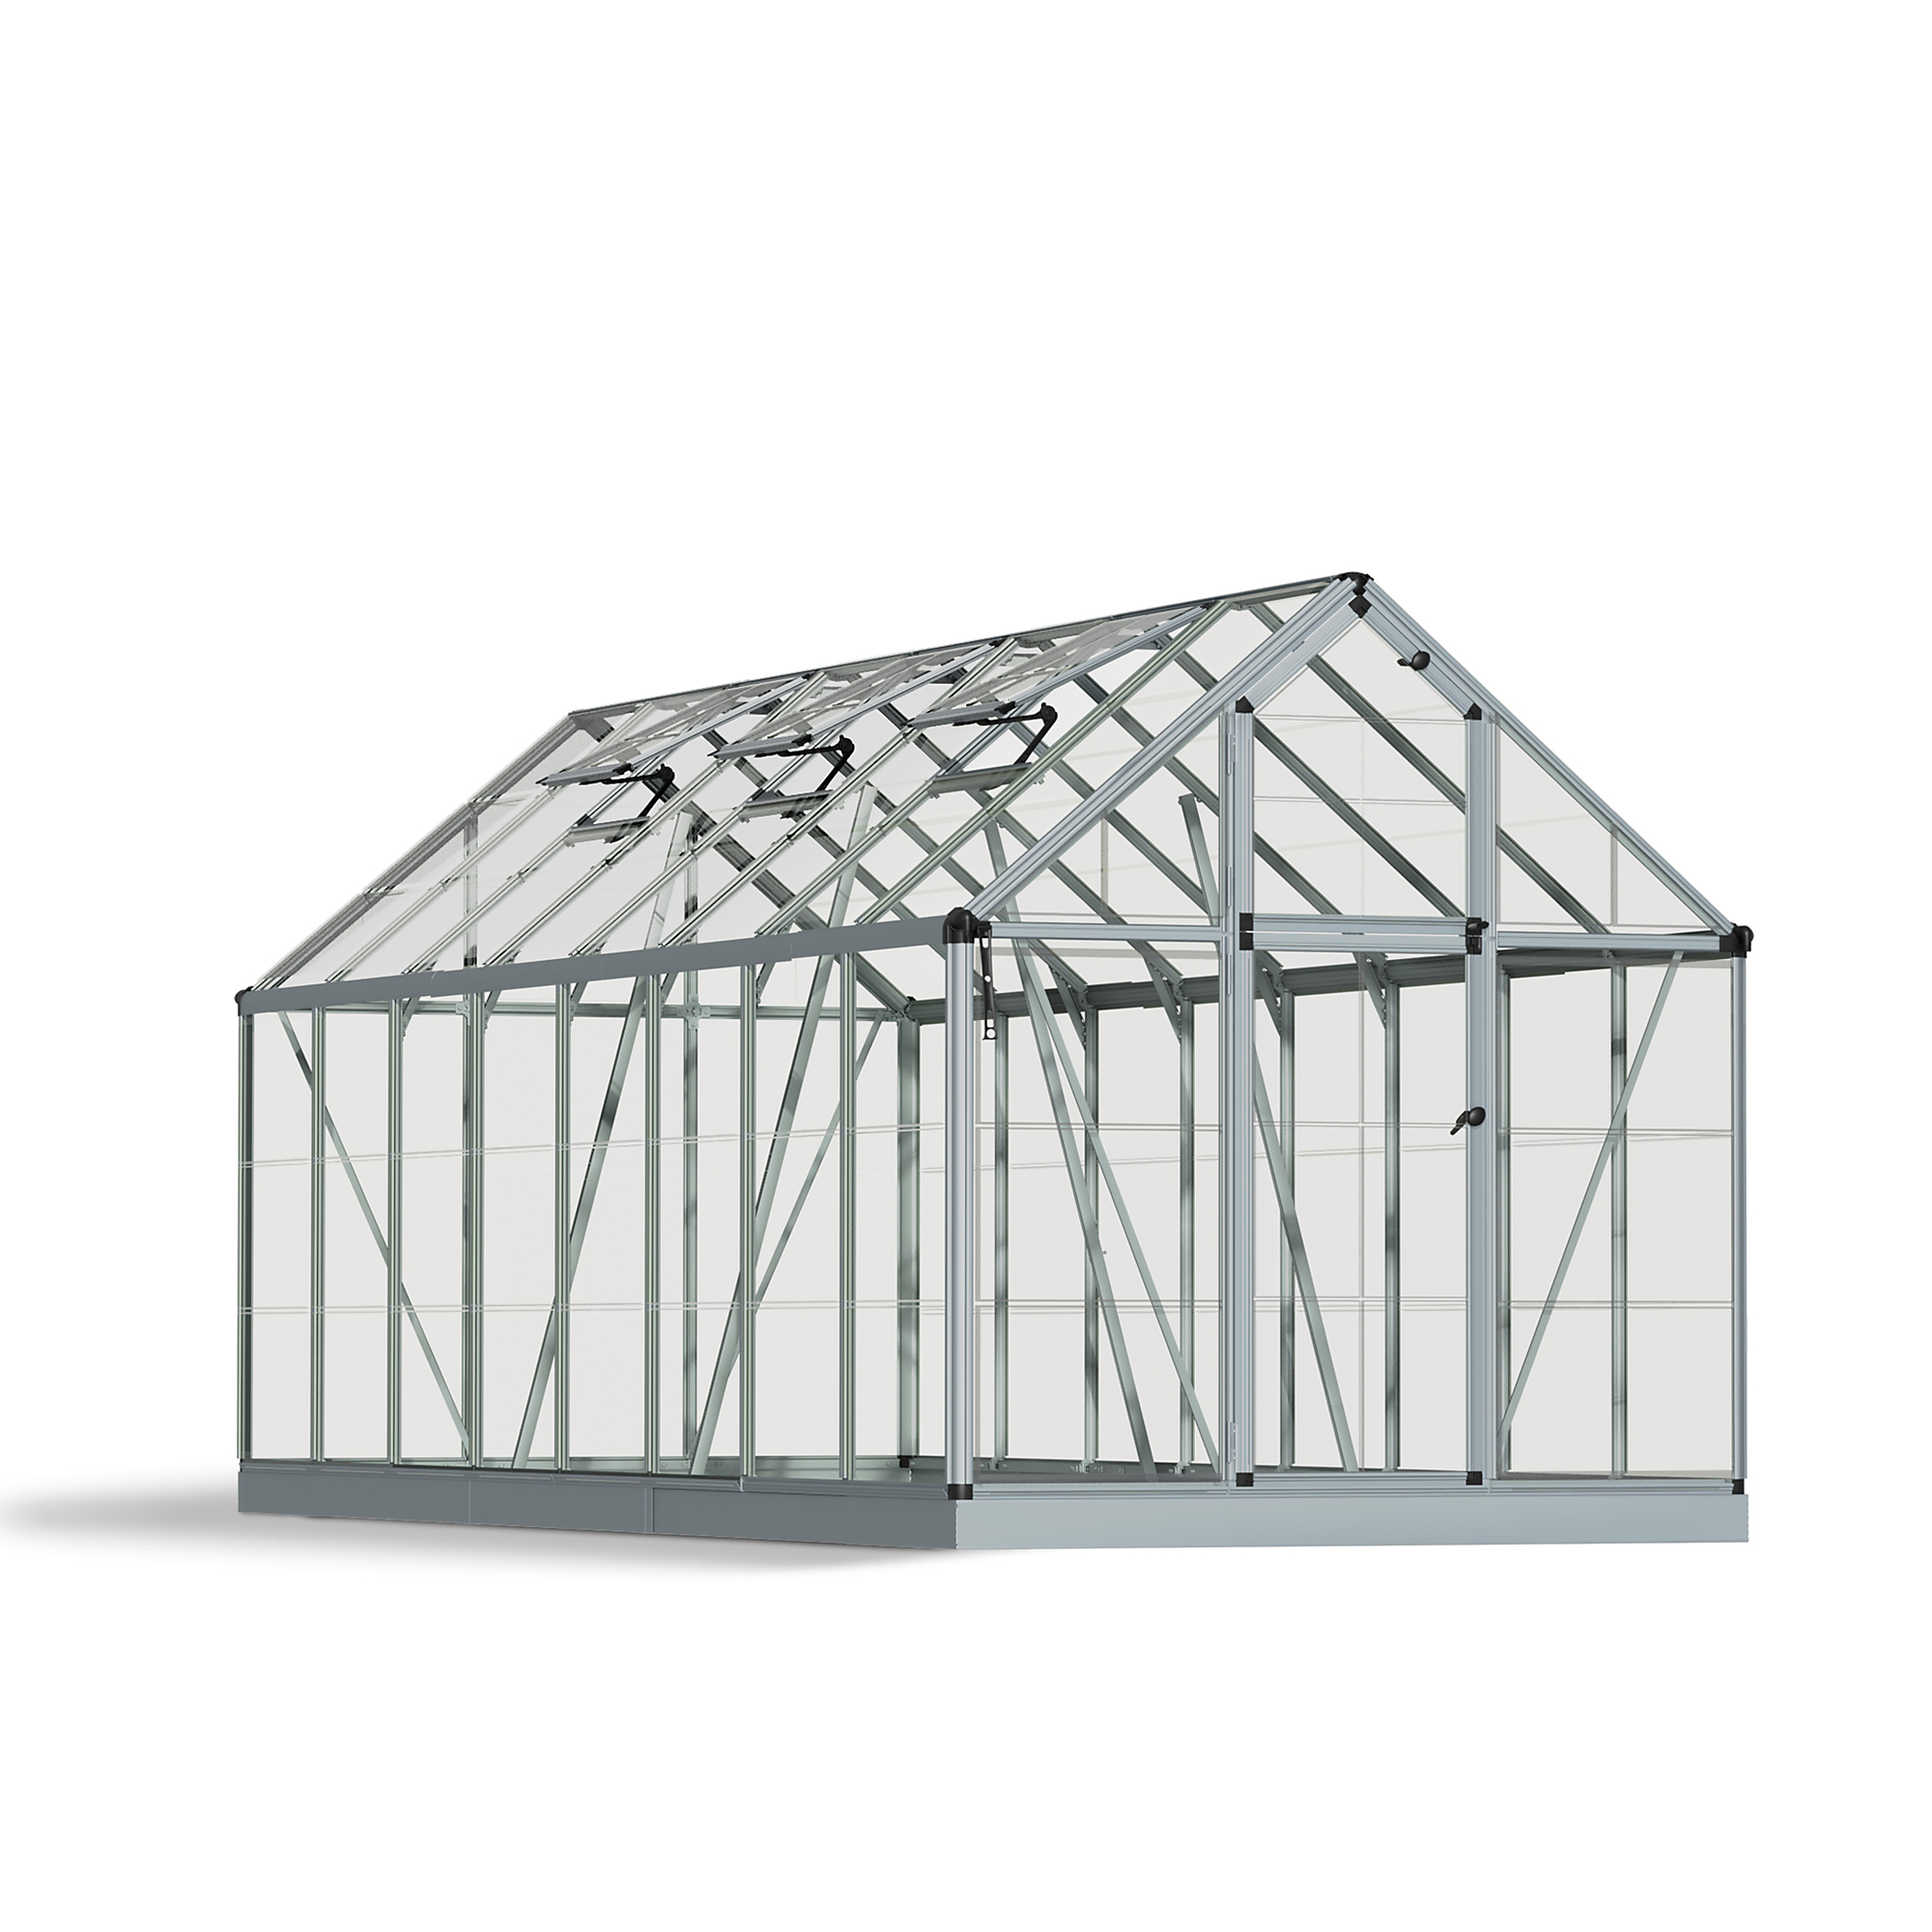 Poly-Tex Inc., 6ft. x 16ft. Greenhouse - Silver, Length 196.8 in, Width 75.6 in, Center Height 82.5 in, Model 701547